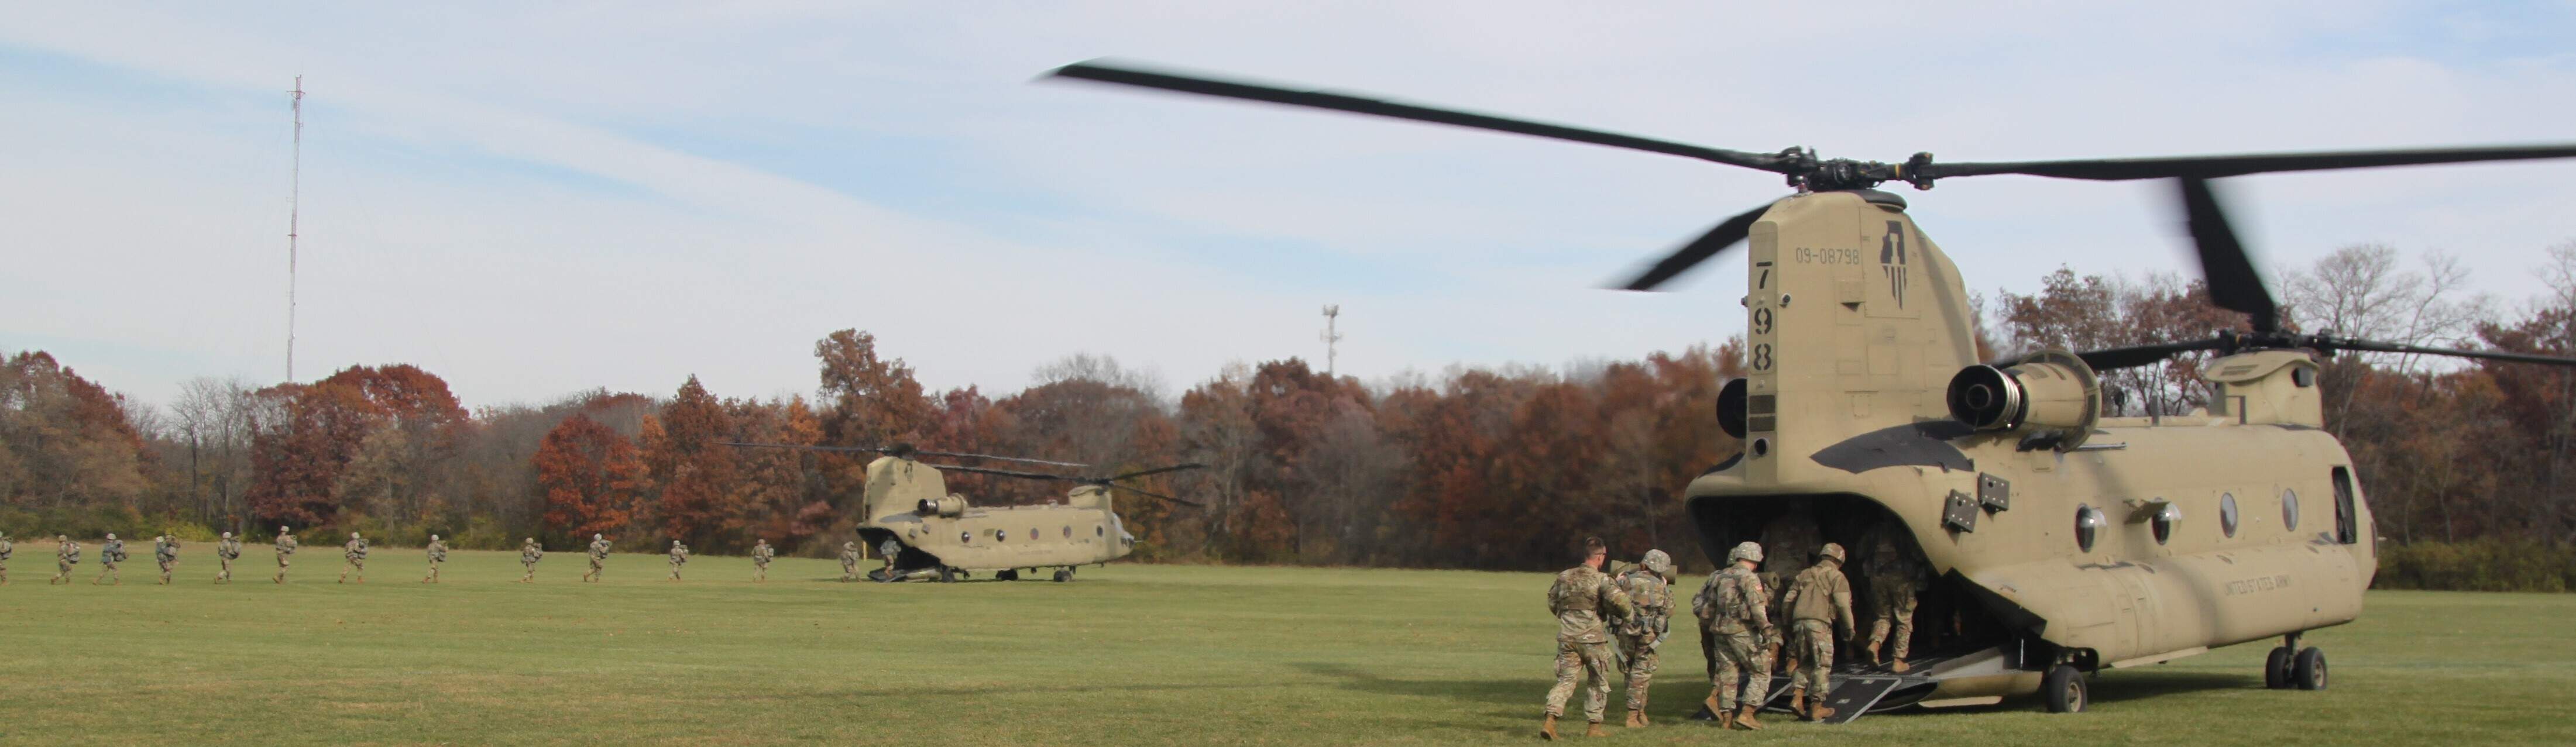 Cadets entering CH-47 Chinook at Vince Grady Field